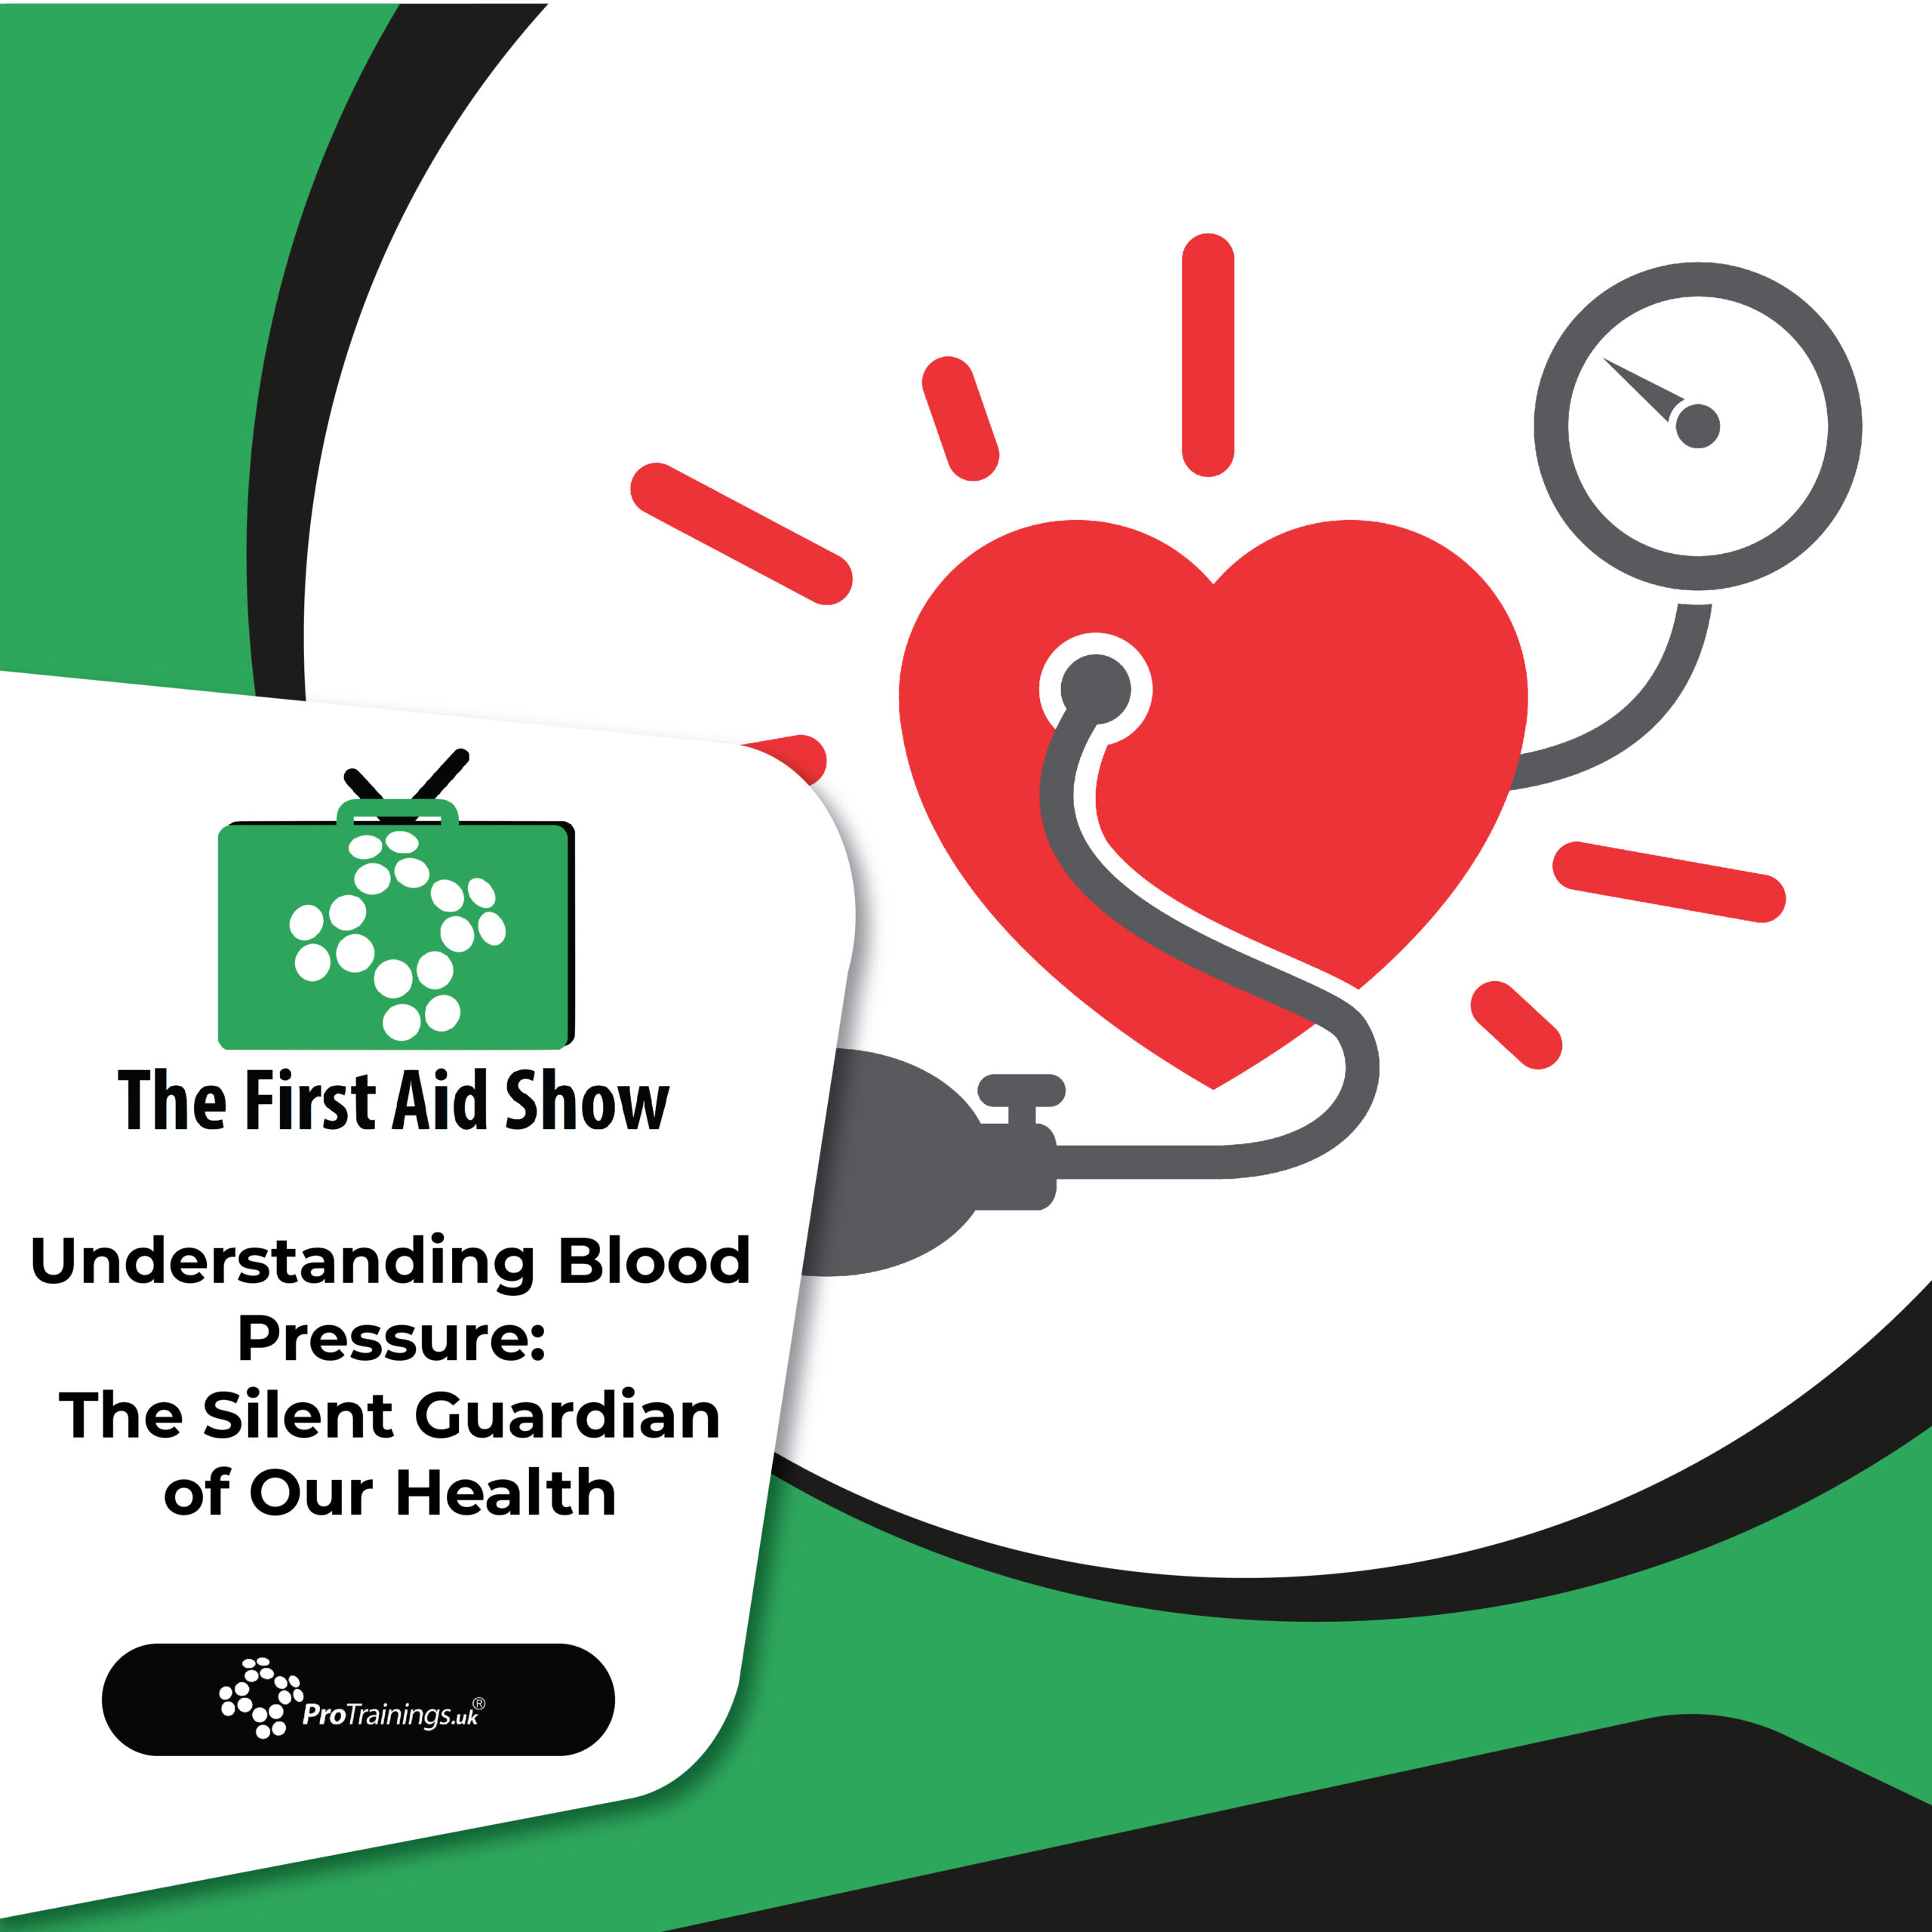 Understanding Blood Pressure: The Silent Guardian of Our Health